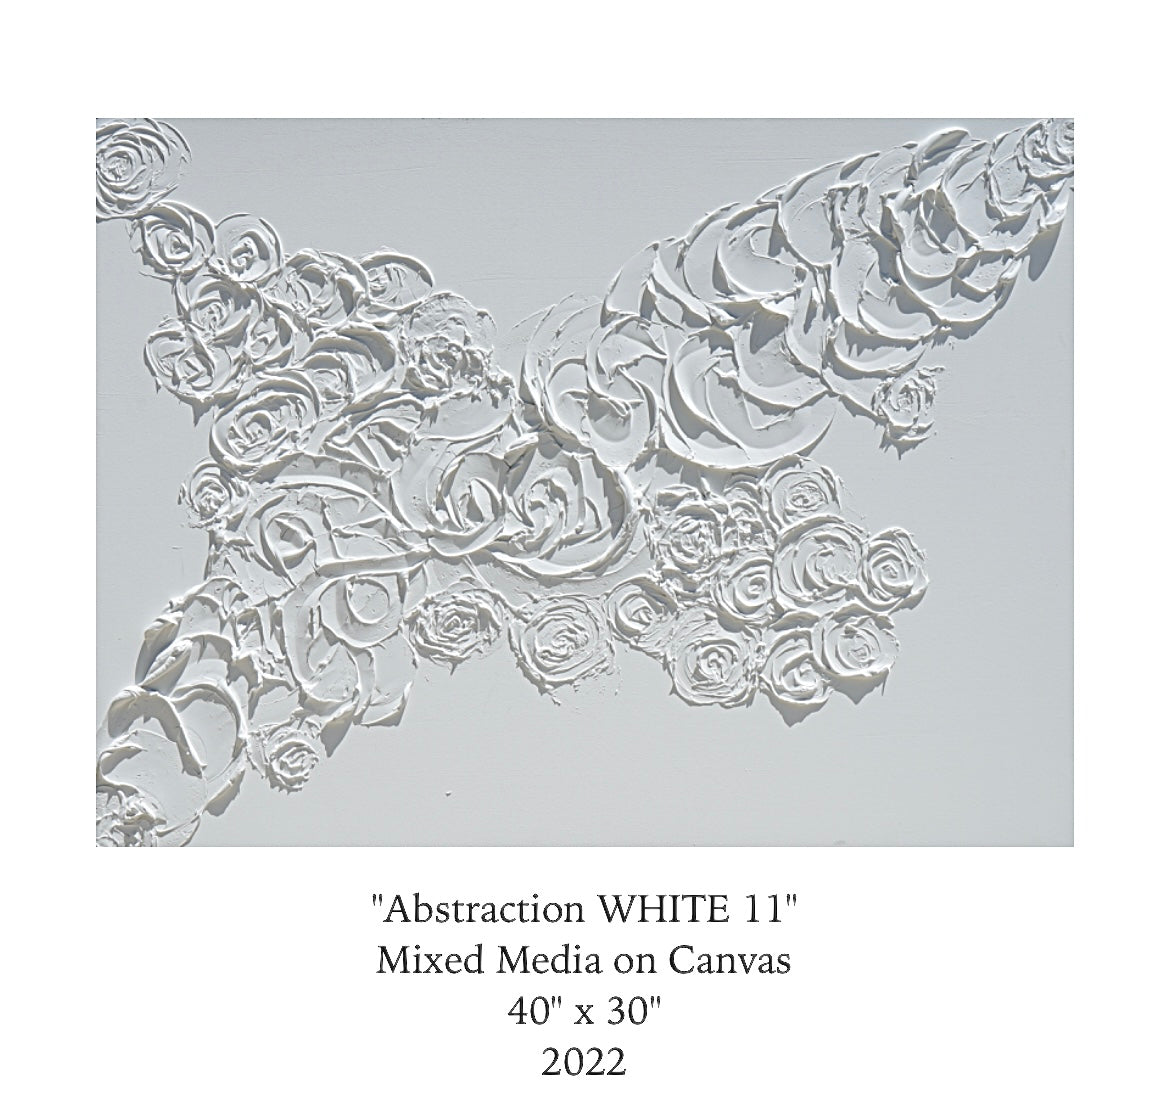 Abstraction WHITE 11